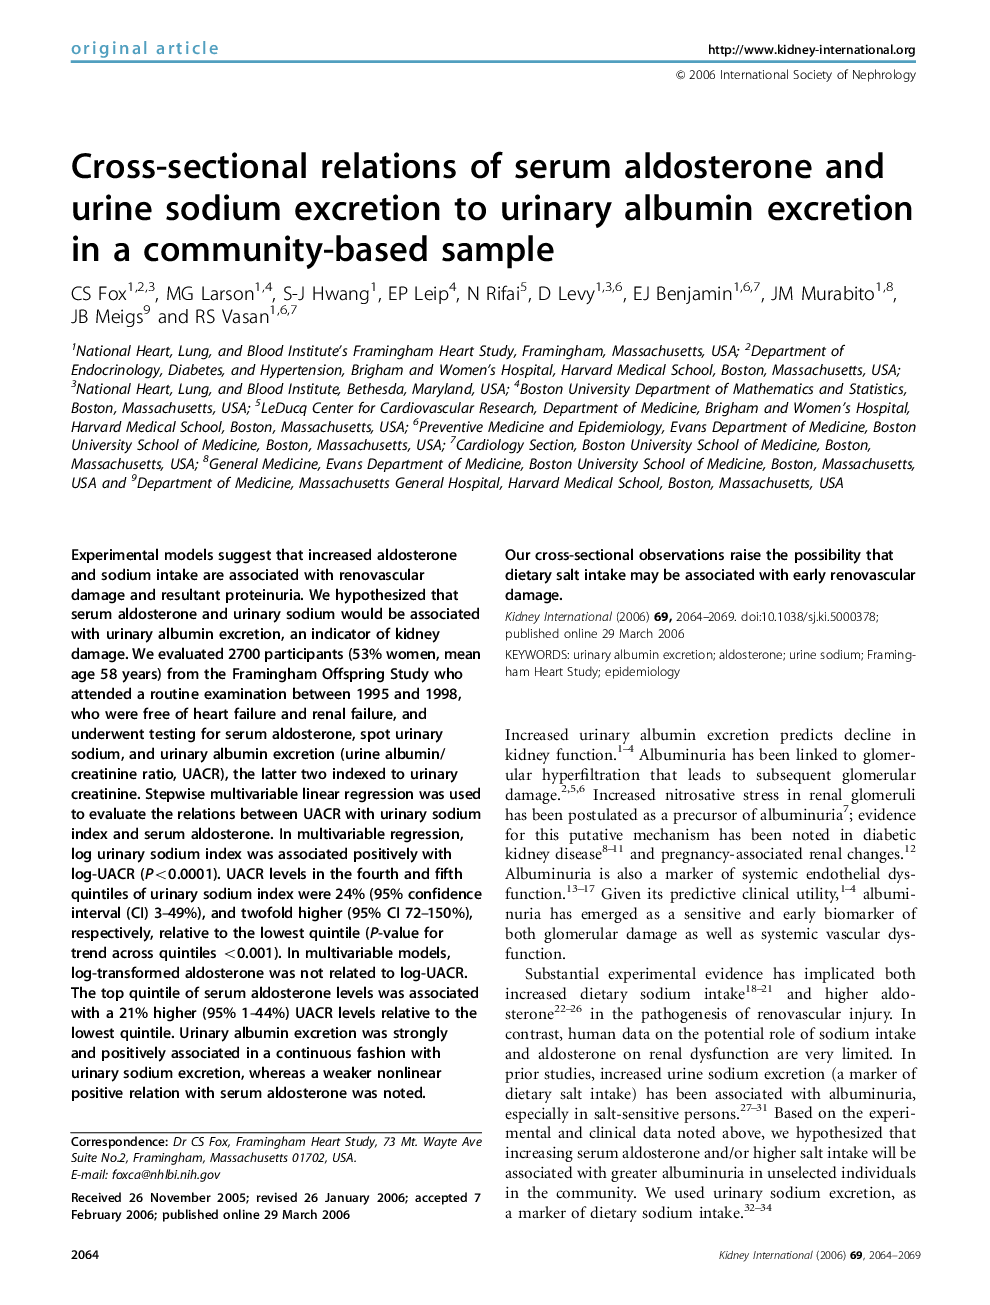 Cross-sectional relations of serum aldosterone and urine sodium excretion to urinary albumin excretion in a community-based sample